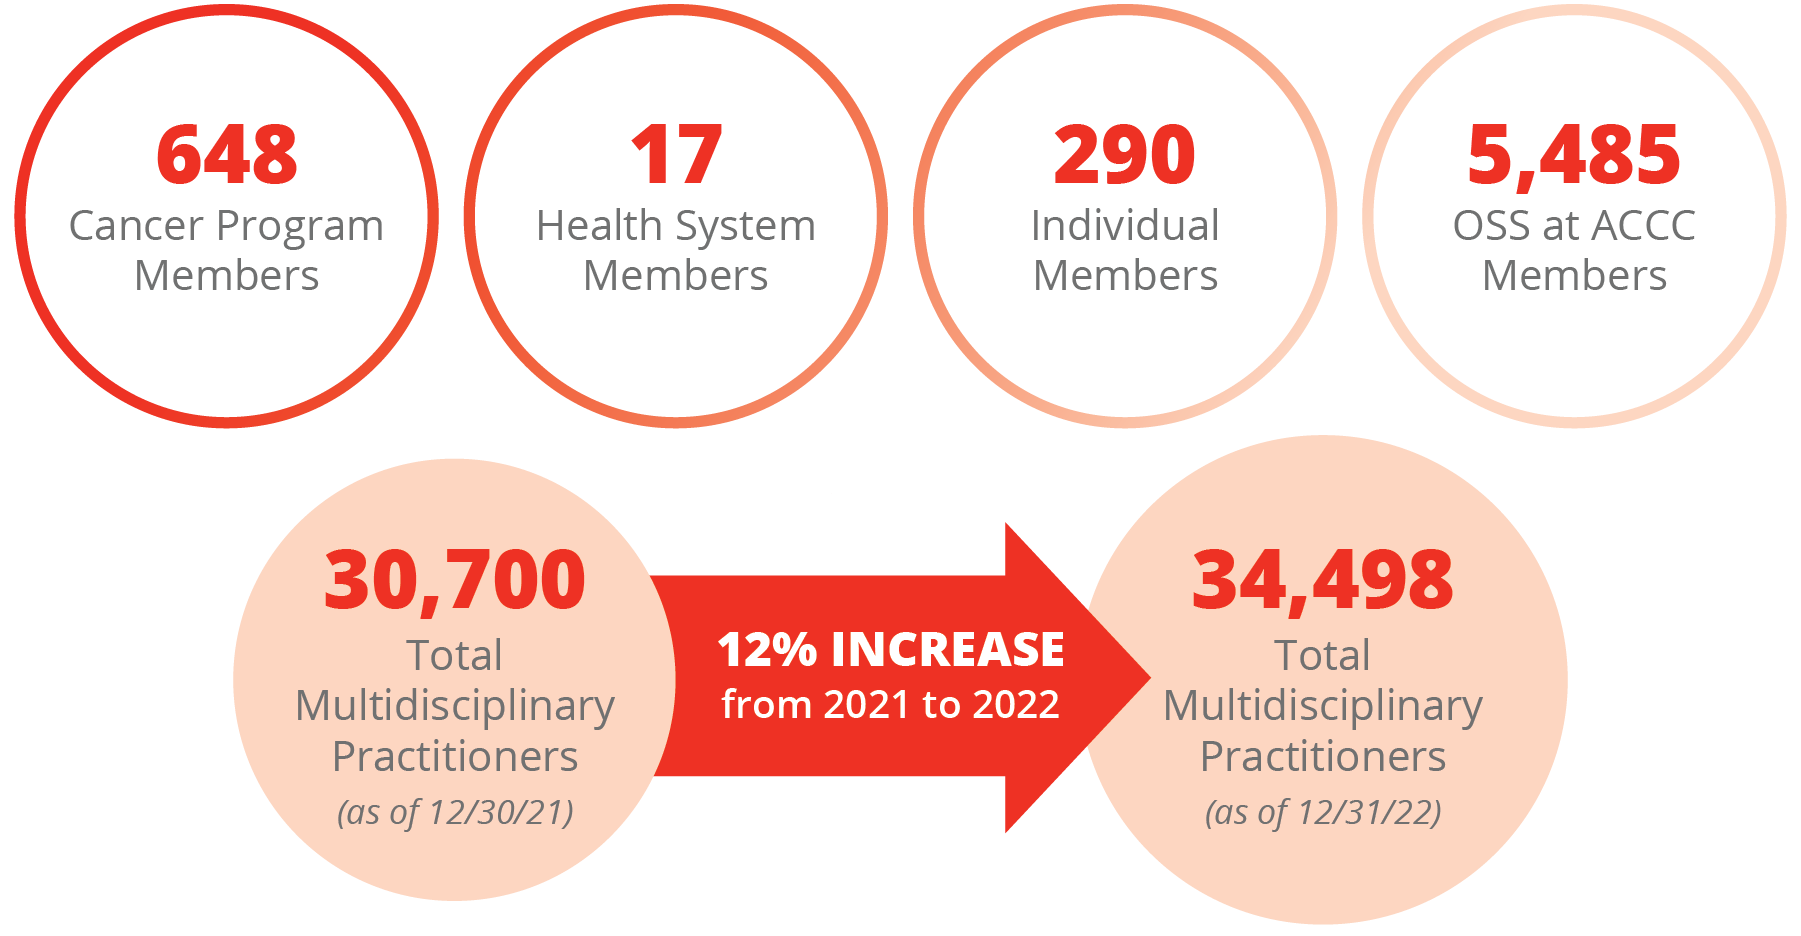 648 Cancer Program Members, 17 Health System Members, 290 Individual Members, 5,485 OSS at ACCC Members. 12% increase in practioners from 2021 to 2022